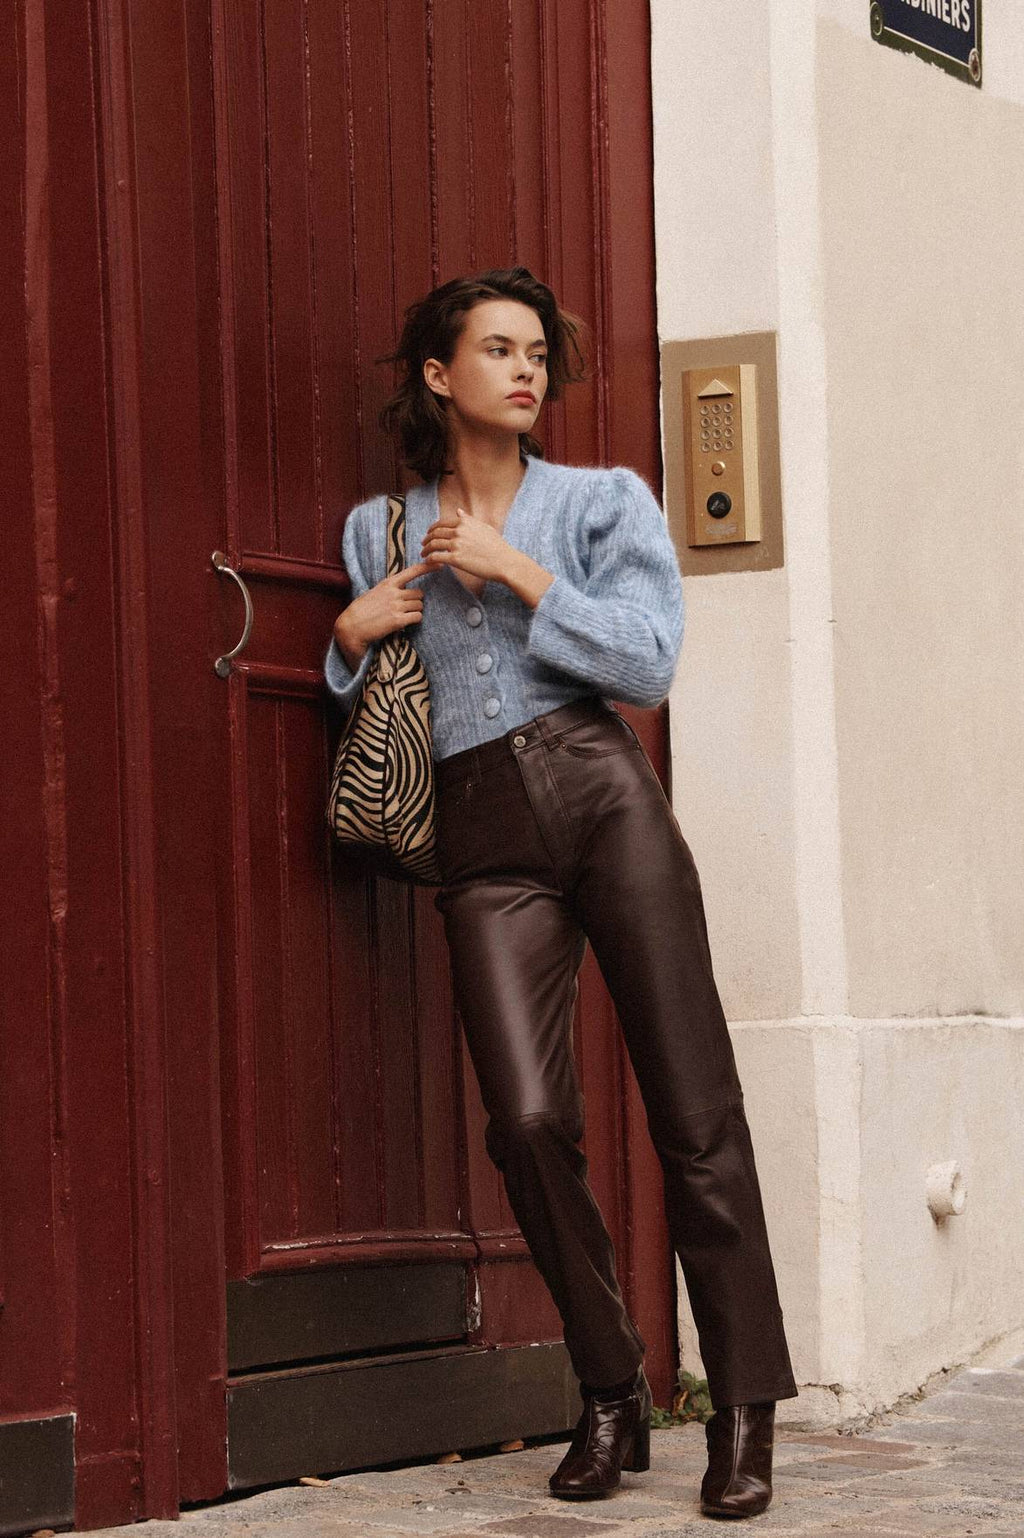 Upgrade your wardrobe with our Pantalón Marais Cuir Chocolat. Crafted from high-quality leather, these pants feature a straight lining for a sleek look and a mid-rise waist for a comfortable fit. With a subtle "R" embroidery on the back pocket, you'll add a touch of elegance to any outfit.